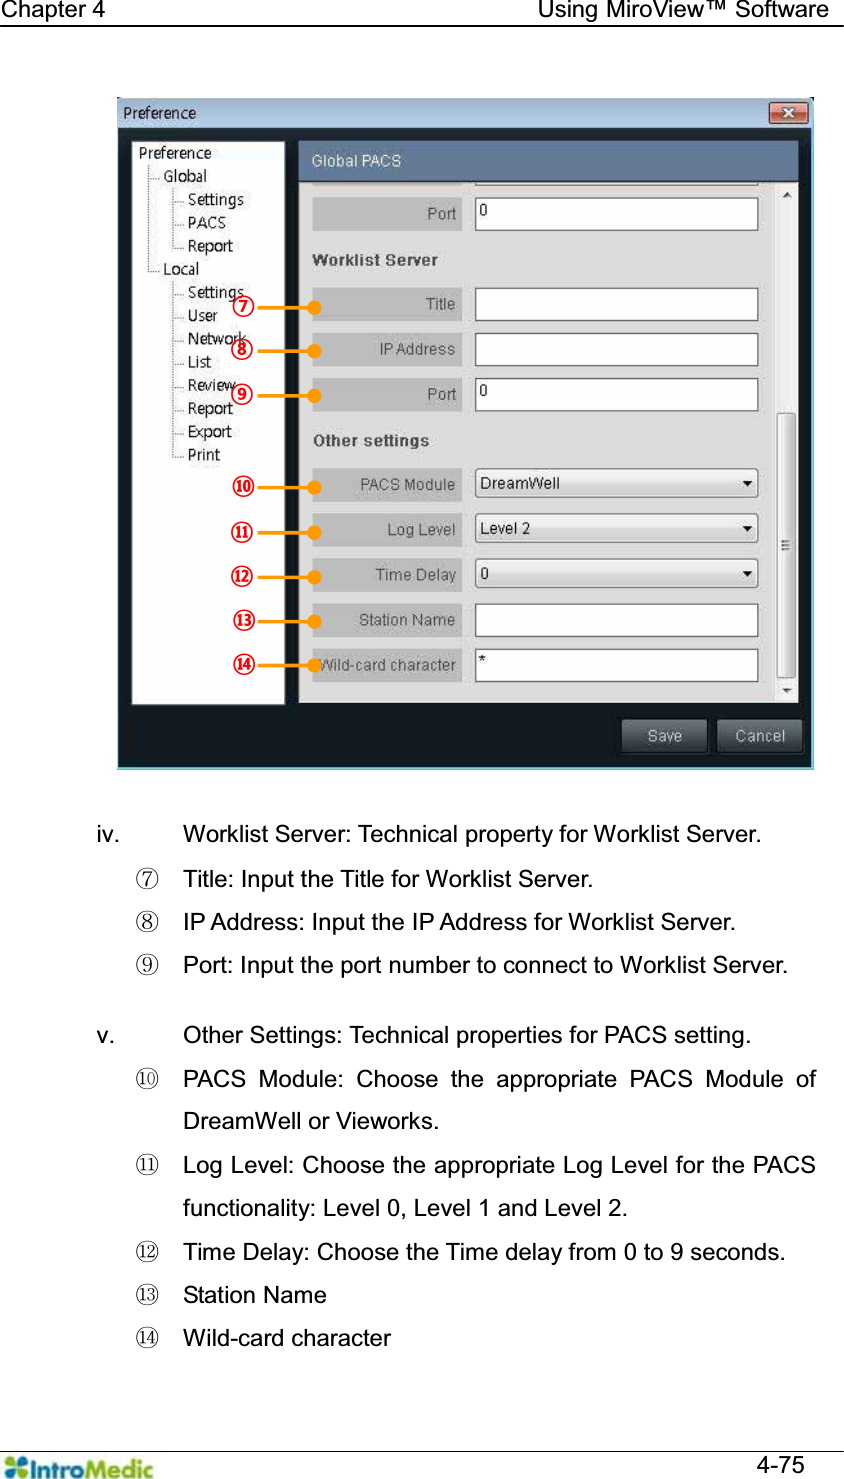   Chapter 4                                    Using 0LUR9LHZ Software  4-75   iv.  Worklist Server: Technical property for Worklist Server. ཡ  Title: Input the Title for Worklist Server. ར  IP Address: Input the IP Address for Worklist Server. ལ  Port: Input the port number to connect to Worklist Server.  v.  Other Settings: Technical properties for PACS setting. ཤ  PACS Module: Choose the appropriate PACS Module of DreamWell or Vieworks. ཥ  Log Level: Choose the appropriate Log Level for the PACS functionality: Level 0, Level 1 and Level 2. ས  Time Delay: Choose the Time delay from 0 to 9 seconds. ཧ Station Name ཨ Wild-card character ¯ ®  ¬ ª © ¨ « 